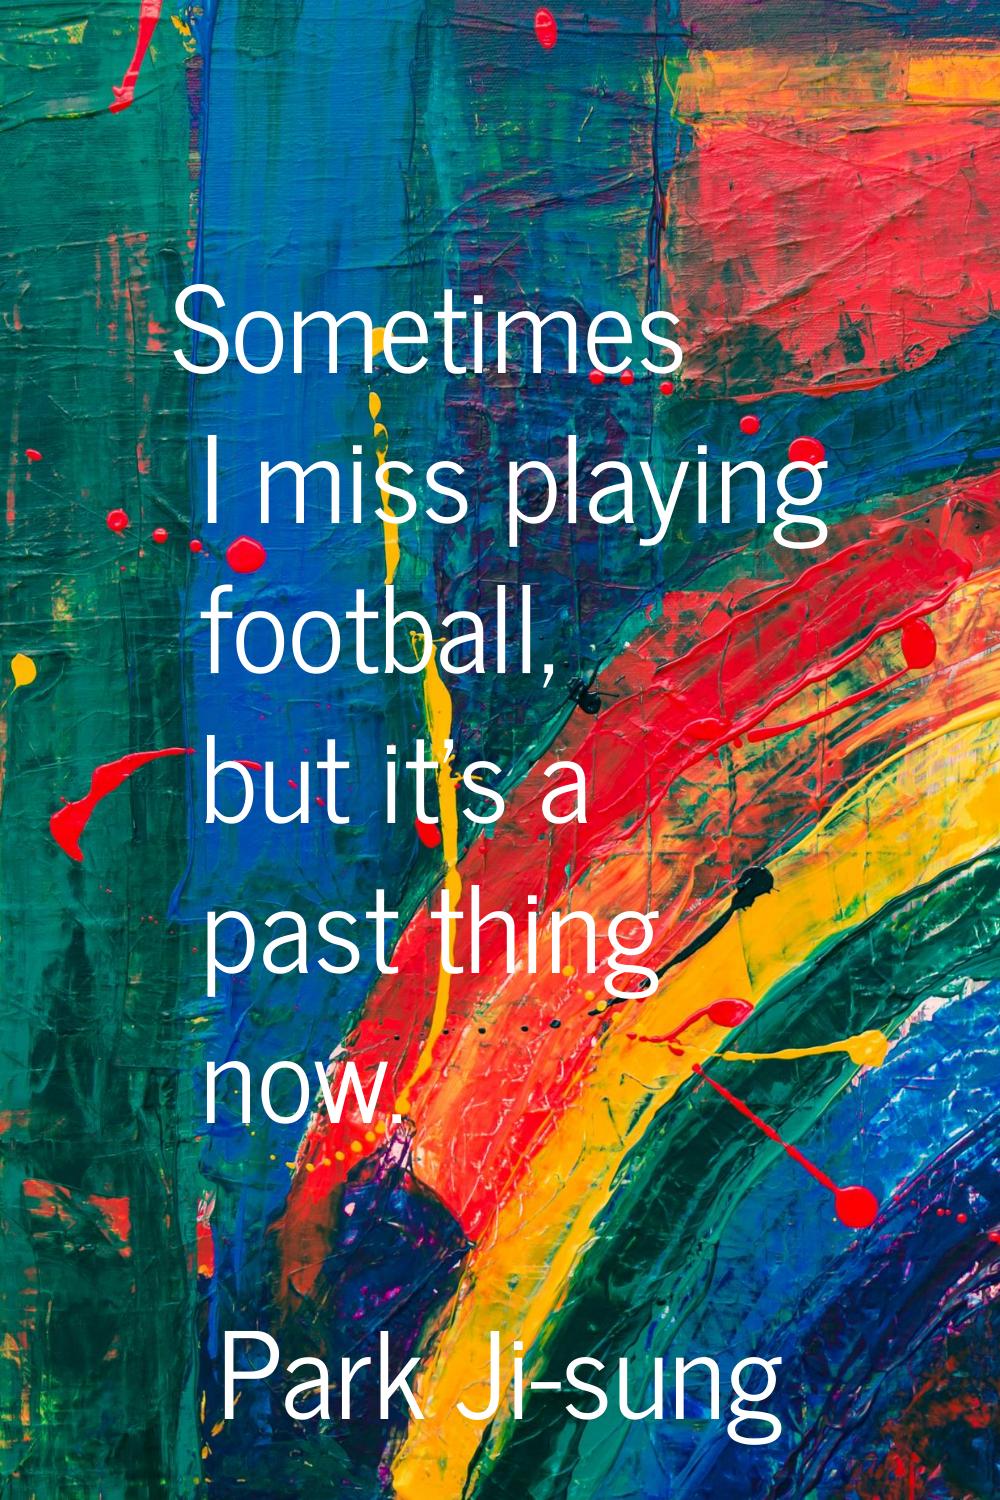 Sometimes I miss playing football, but it's a past thing now.